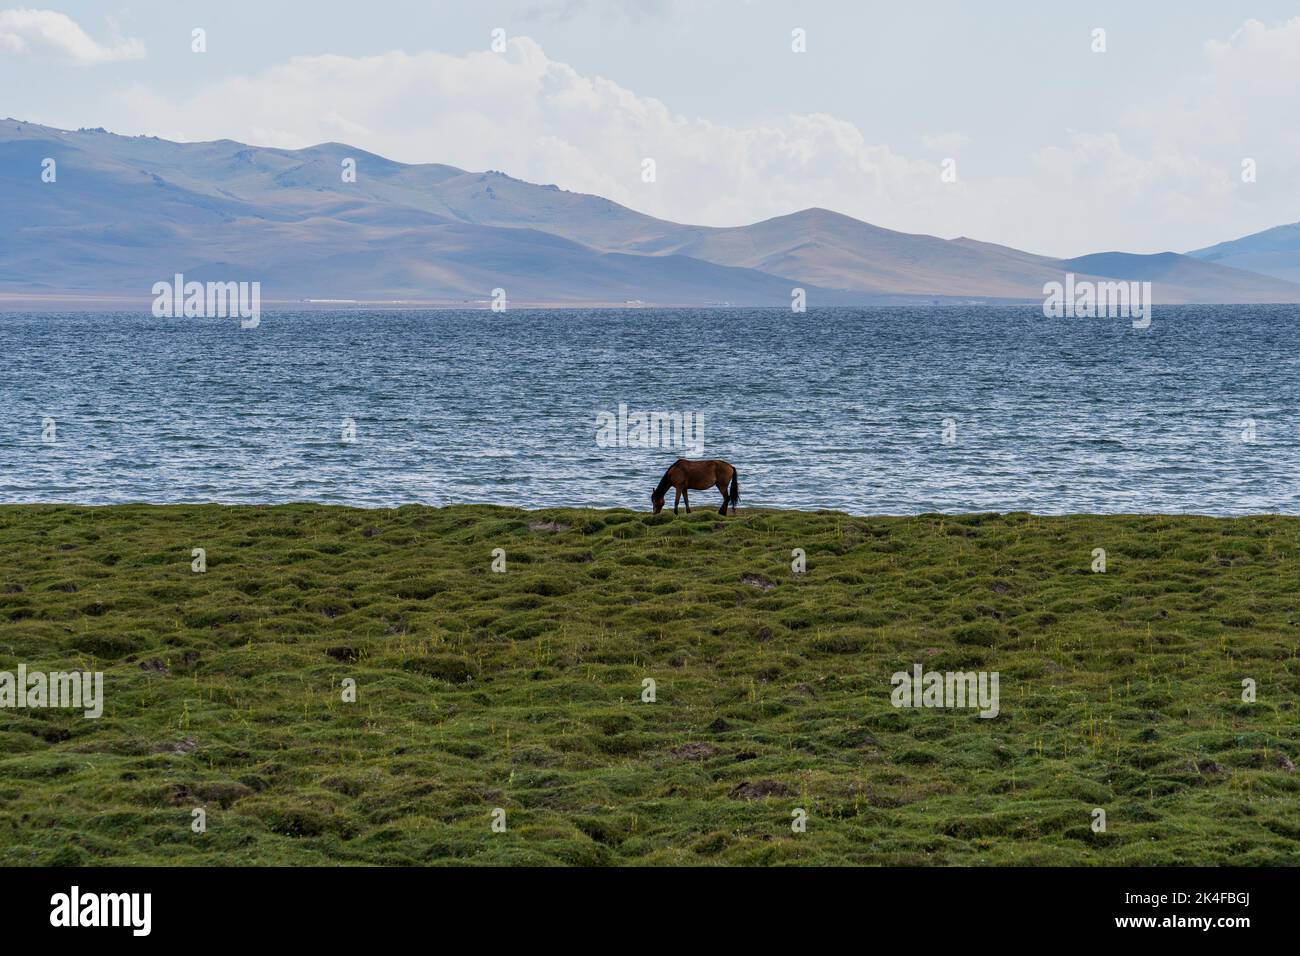 Lone horse grazing plains on the shore of Song Kul Lake with mountains in distance, Kyrgyzstan Stock Photo